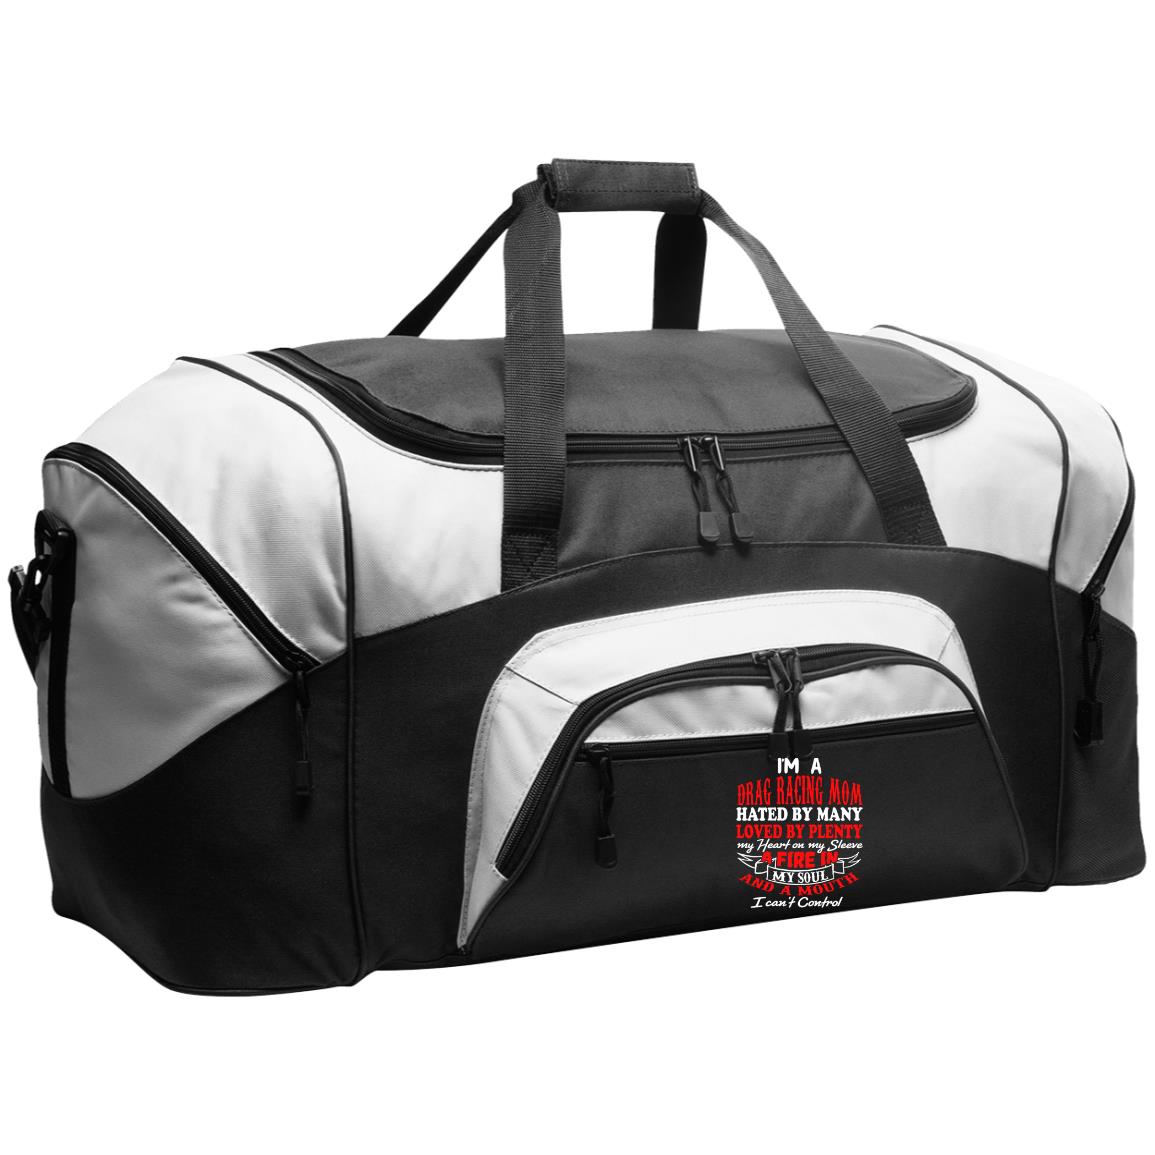 I'm A Drag Racing Mom Hated By Many Loved By Plenty Colorblock Sport Duffel